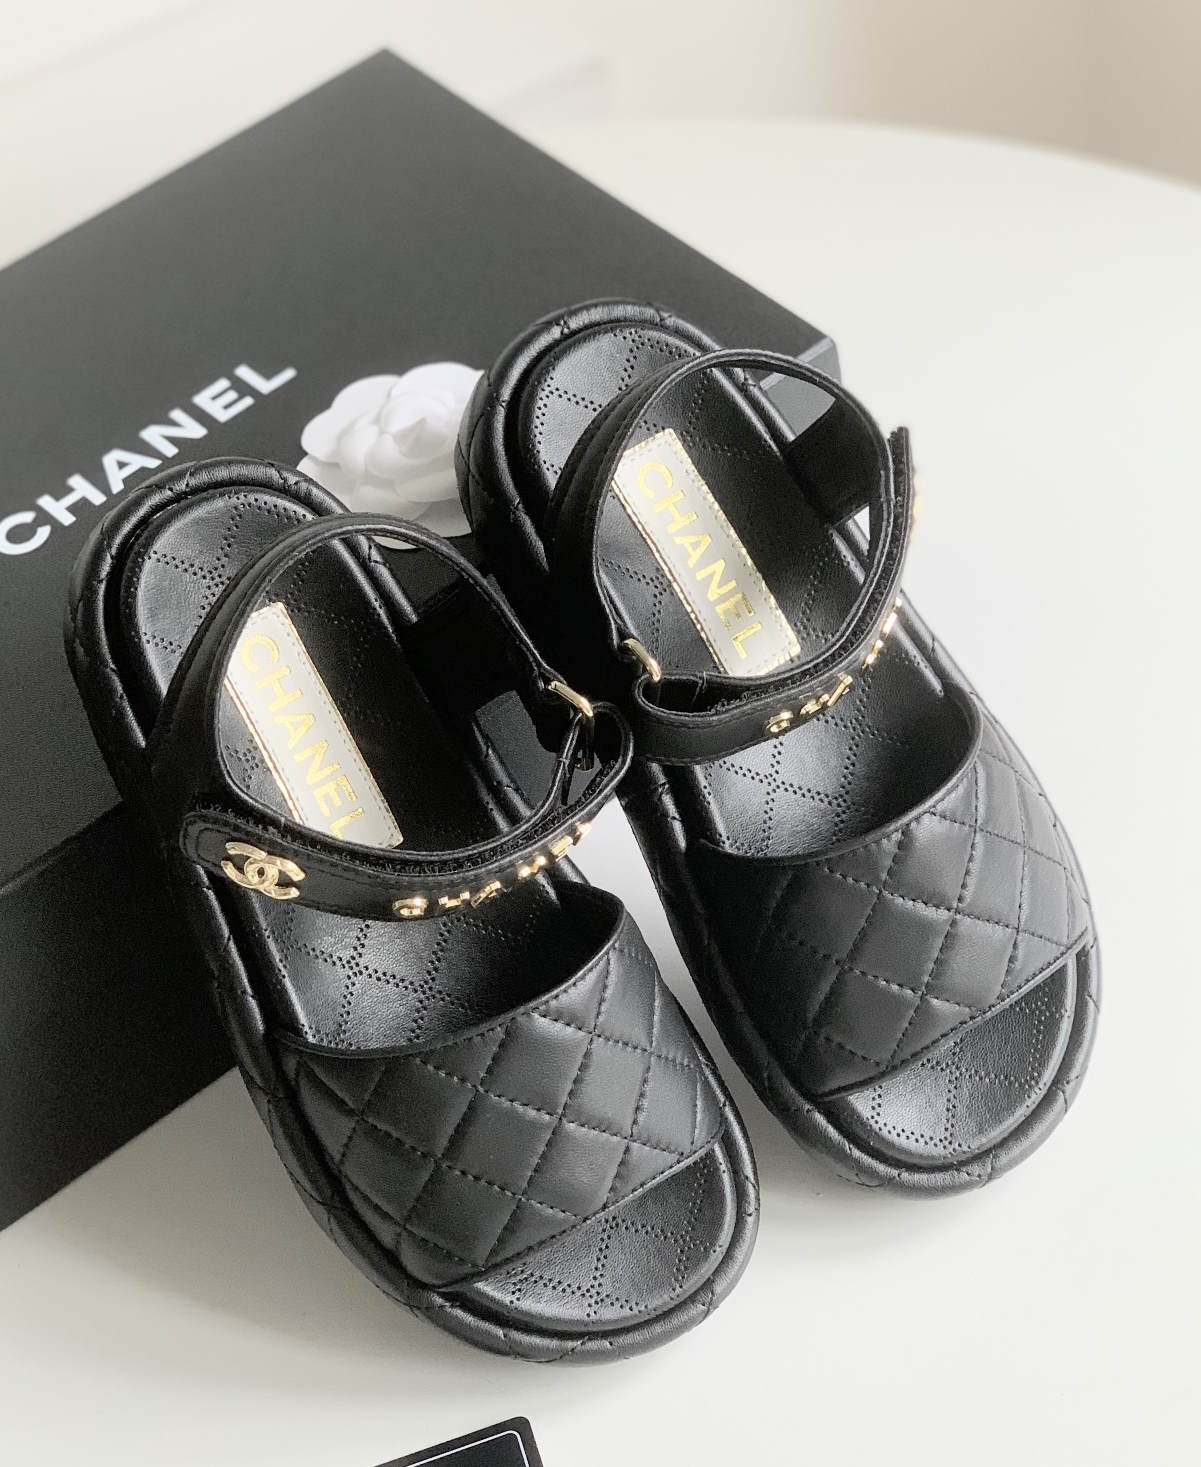 CHL Slippers Sandals 2 Color 's